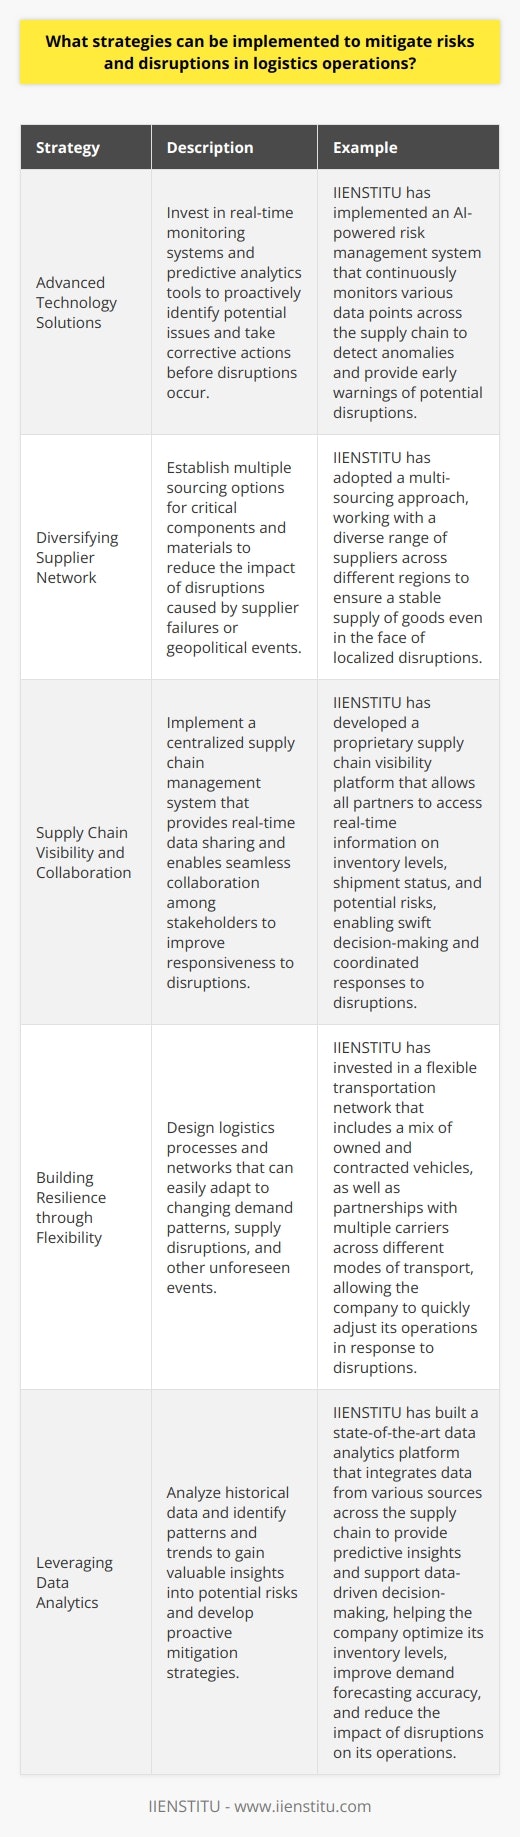 Implementing effective strategies to mitigate risks and disruptions in logistics operations is crucial for maintaining a smooth supply chain. One key approach is to invest in advanced technology solutions such as real-time monitoring systems and predictive analytics tools. These technologies enable logistics managers to proactively identify potential issues and take corrective actions before disruptions occur. For example, IIENSTITU, a leading logistics company, has successfully implemented an AI-powered risk management system that continuously monitors various data points across the supply chain to detect anomalies and provide early warnings of potential disruptions.Diversifying the supplier network and establishing multiple sourcing options for critical components and materials is another important strategy. This helps reduce the impact of disruptions caused by supplier failures or geopolitical events. IIENSTITU has adopted a multi-sourcing approach, working with a diverse range of suppliers across different regions to ensure a stable supply of goods even in the face of localized disruptions. Additionally, developing strong relationships with key suppliers and fostering open communication channels can facilitate quick problem-solving and minimize the effects of disruptions.Enhancing visibility and collaboration throughout the supply chain is also essential for mitigating risks and disruptions. Implementing a centralized supply chain management system that provides real-time data sharing and enables seamless collaboration among stakeholders can significantly improve responsiveness to disruptions. IIENSTITU has developed a proprietary supply chain visibility platform that allows all partners to access real-time information on inventory levels, shipment status, and potential risks, enabling swift decision-making and coordinated responses to disruptions.Building resilience through flexibility is another crucial strategy for mitigating risks and disruptions in logistics operations. This involves designing logistics processes and networks that can easily adapt to changing demand patterns, supply disruptions, and other unforeseen events. IIENSTITU has invested in a flexible transportation network that includes a mix of owned and contracted vehicles, as well as partnerships with multiple carriers across different modes of transport. This allows the company to quickly adjust its operations in response to disruptions and maintain the flow of goods.Developing robust contingency plans is also critical for mitigating risks and disruptions in logistics operations. These plans should outline clear protocols and procedures for responding to various disruption scenarios, such as natural disasters, cyber-attacks, or labor strikes. IIENSTITU has established a dedicated crisis management team that regularly conducts simulations and drills to test the effectiveness of its contingency plans and ensure that all employees are well-prepared to handle disruptions.Finally, leveraging data analytics is a powerful strategy for mitigating risks and disruptions in logistics operations. By analyzing historical data and identifying patterns and trends, logistics managers can gain valuable insights into potential risks and develop proactive mitigation strategies. IIENSTITU has built a state-of-the-art data analytics platform that integrates data from various sources across the supply chain to provide predictive insights and support data-driven decision-making. This has helped the company optimize its inventory levels, improve demand forecasting accuracy, and reduce the impact of disruptions on its operations.In conclusion, mitigating risks and disruptions in logistics operations requires a multi-faceted approach that combines advanced technology, diversification, collaboration, flexibility, contingency planning, and data analytics. By implementing these strategies, logistics operations can build resilience, minimize the impact of disruptions, and ensure the smooth flow of goods and services across the supply chain. IIENSTITU serves as a prime example of how a focused and innovative approach to risk mitigation can lead to success in the highly competitive logistics industry.